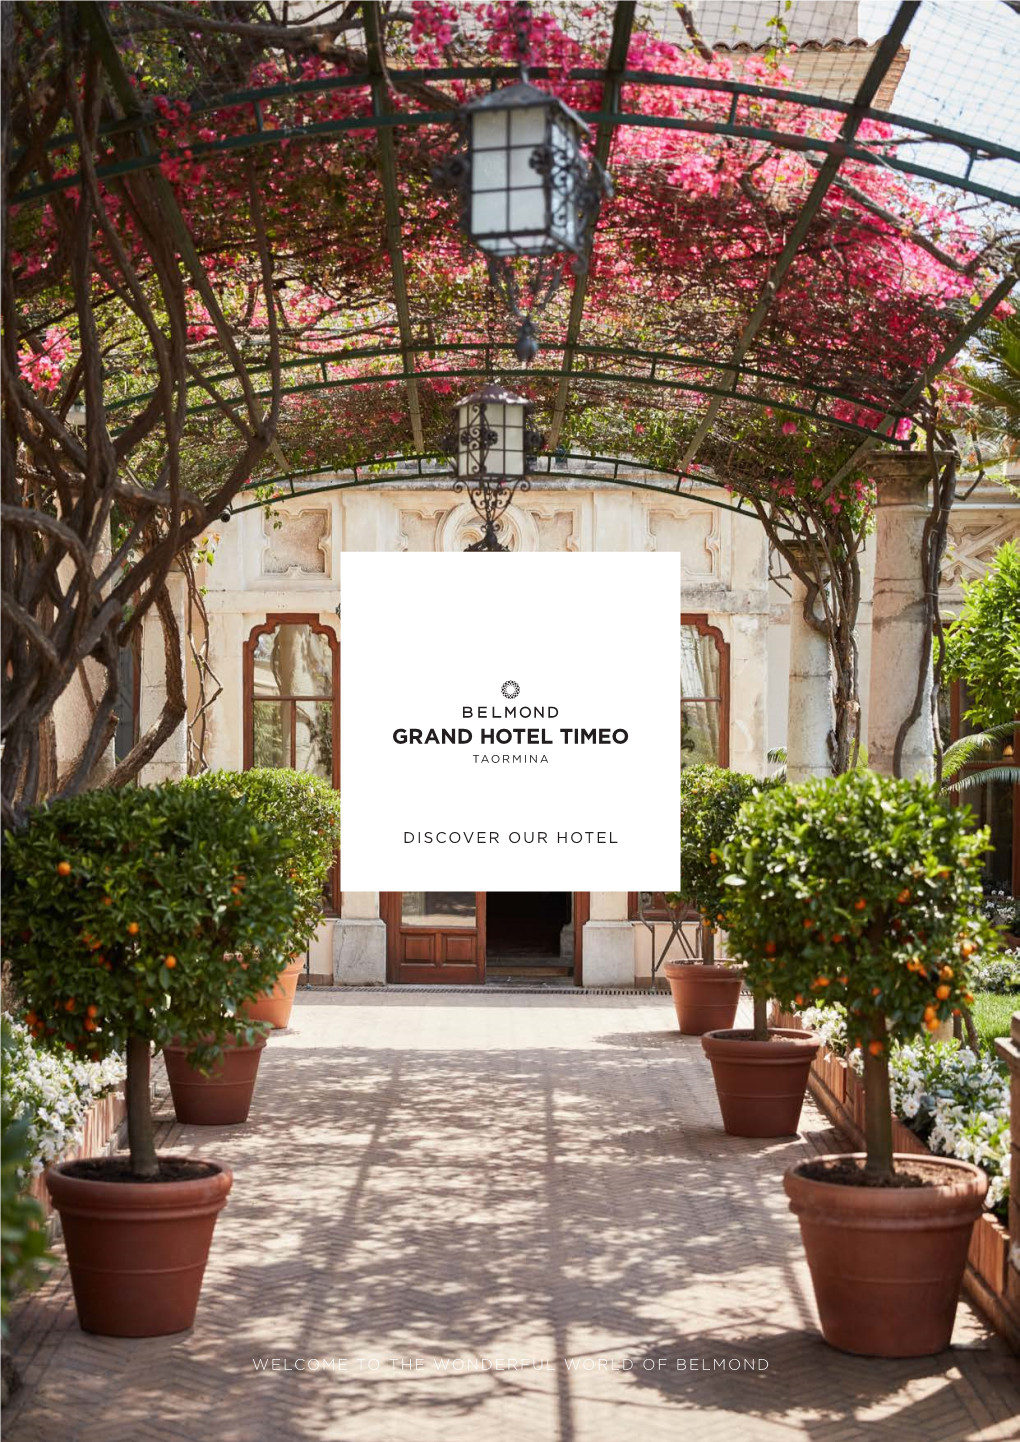 The Wonderful World of Belmond Discover Our Hotel